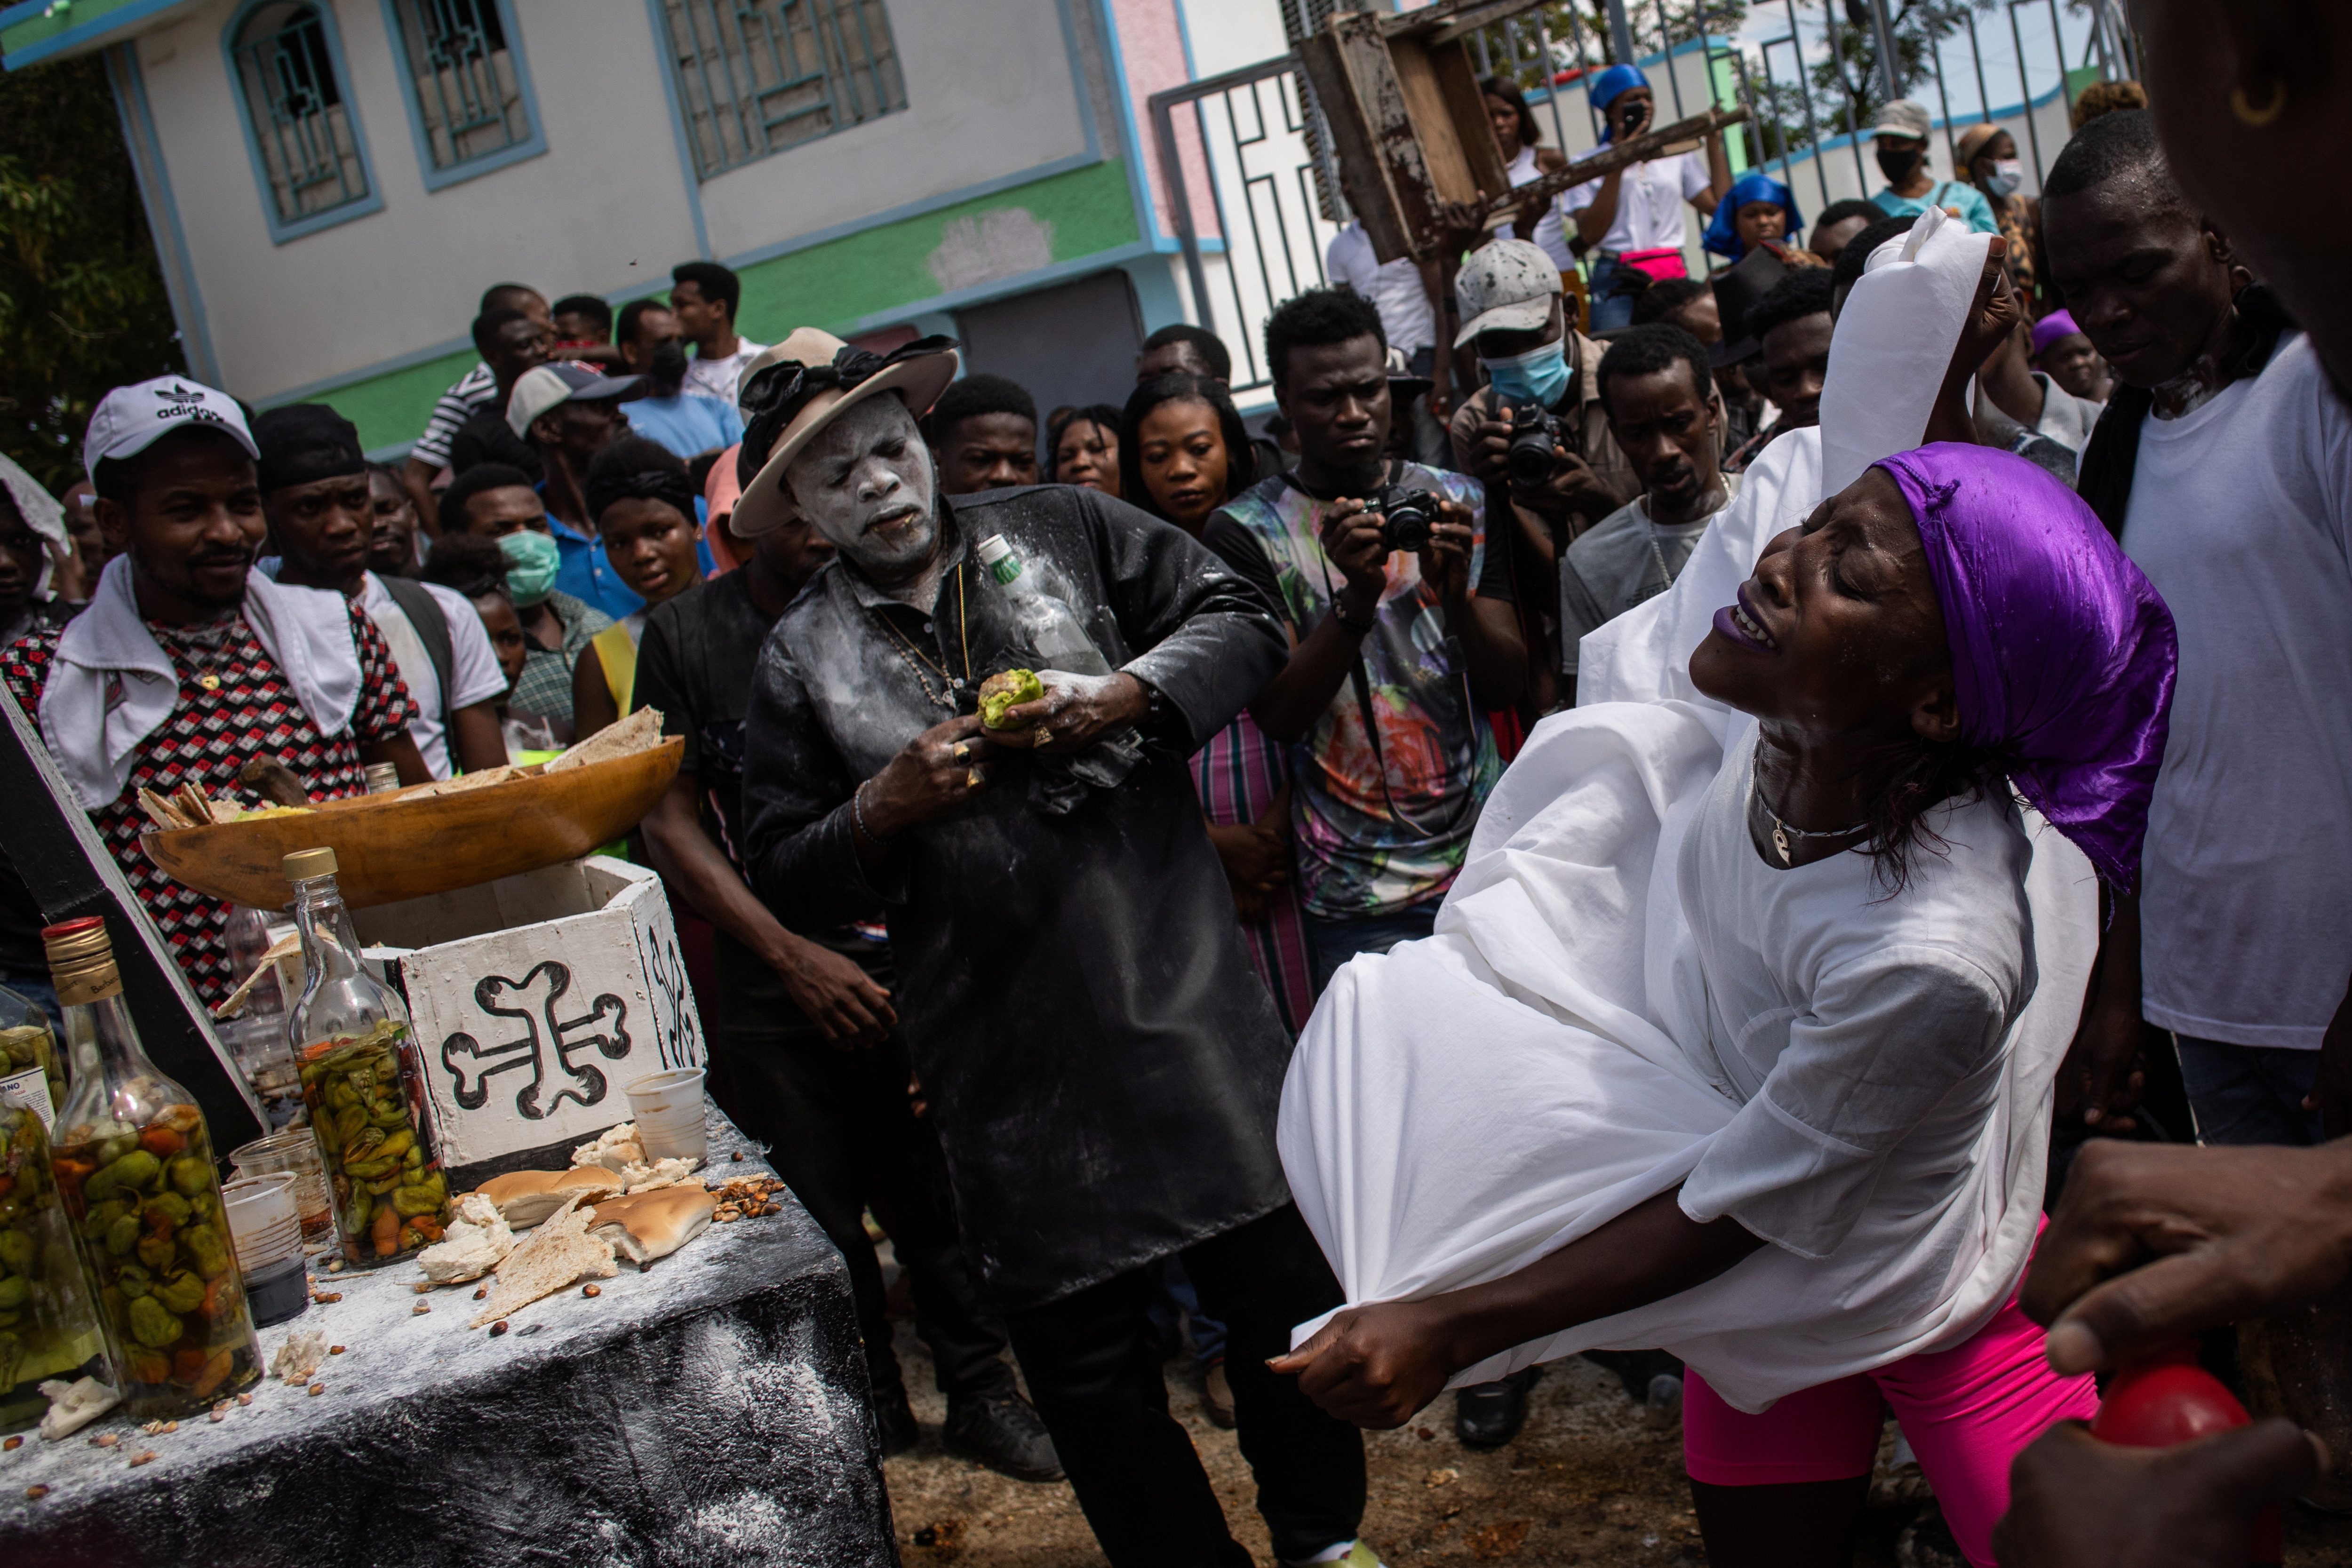 Voodoo followers, called Pitit Fey, attend a ceremony during the Day of the Dead celebrations at the Meyotte cemetery in Kay Gouye, in Port-au-Prince, Haiti, November 1, 2021. REUTERS/Claudia Daut